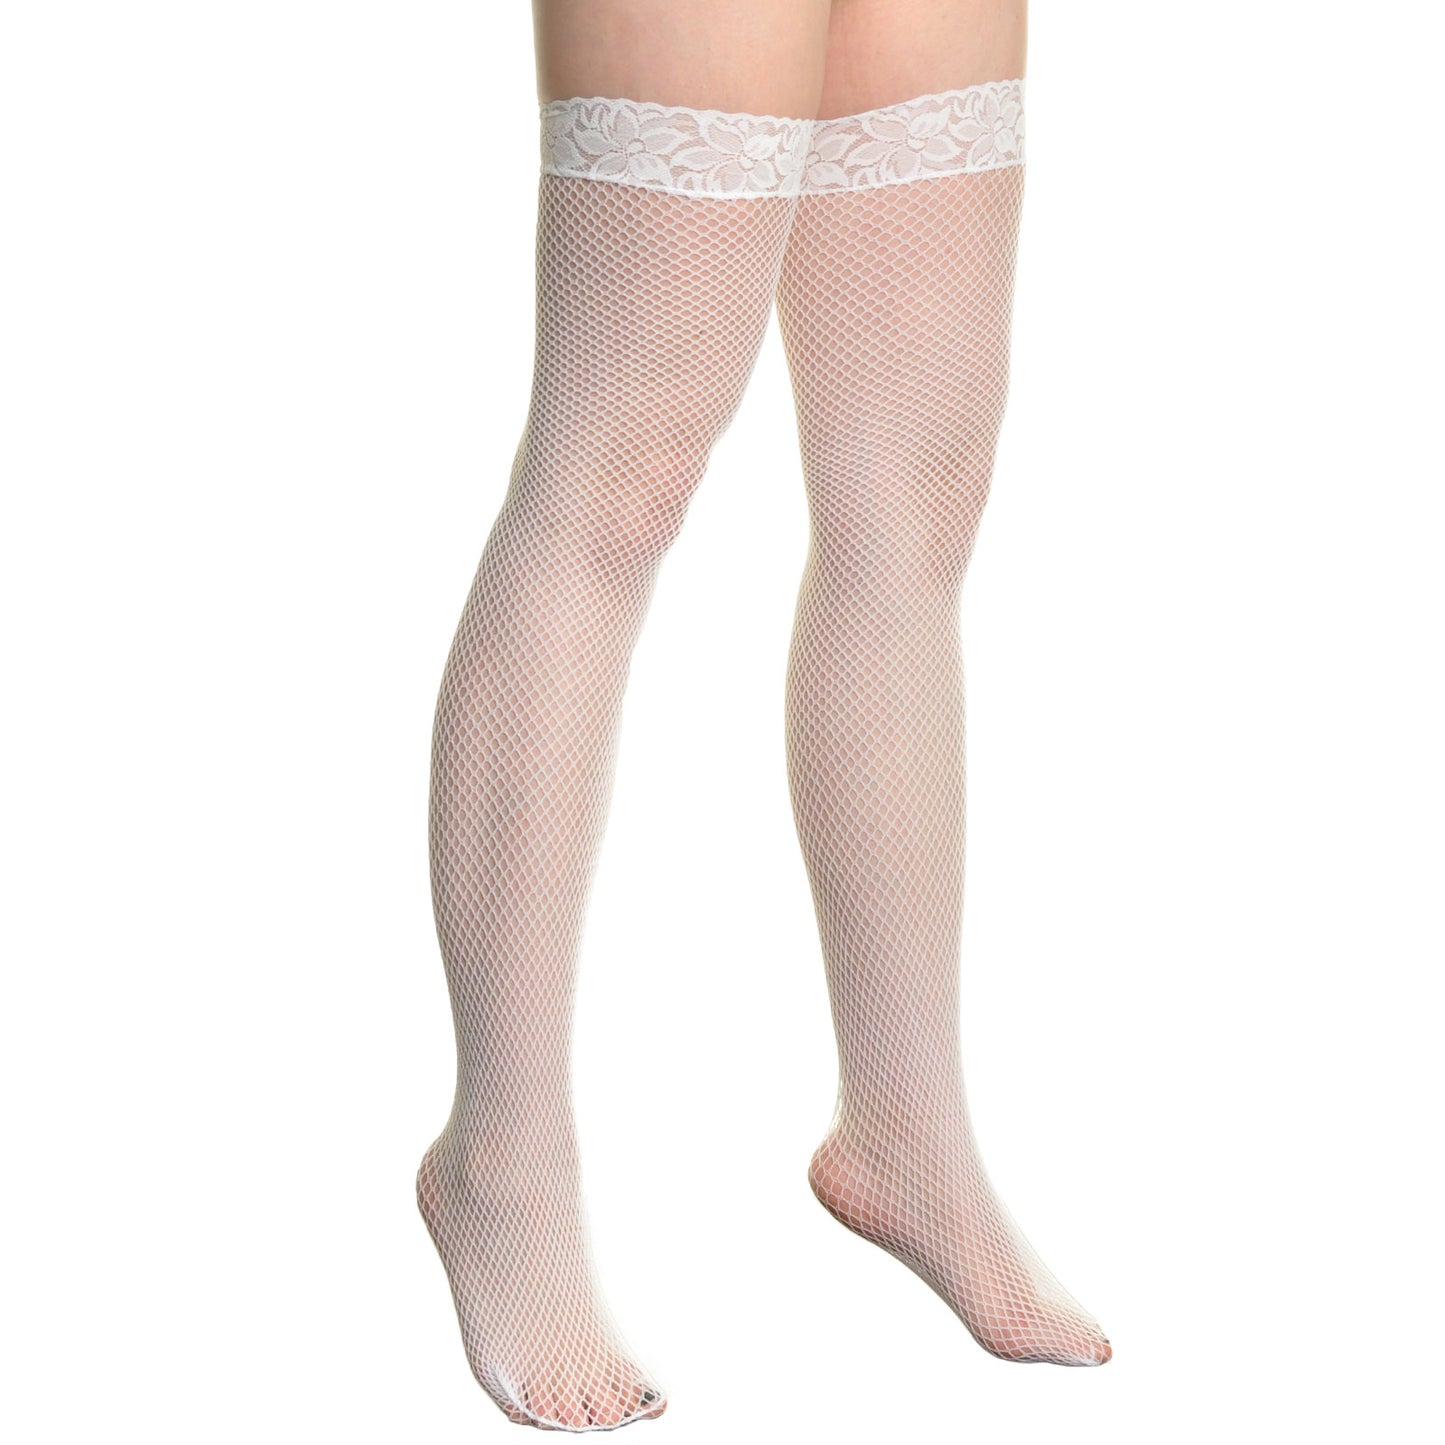 Angelina Fishnet Thigh High with Lace (6-Pack)